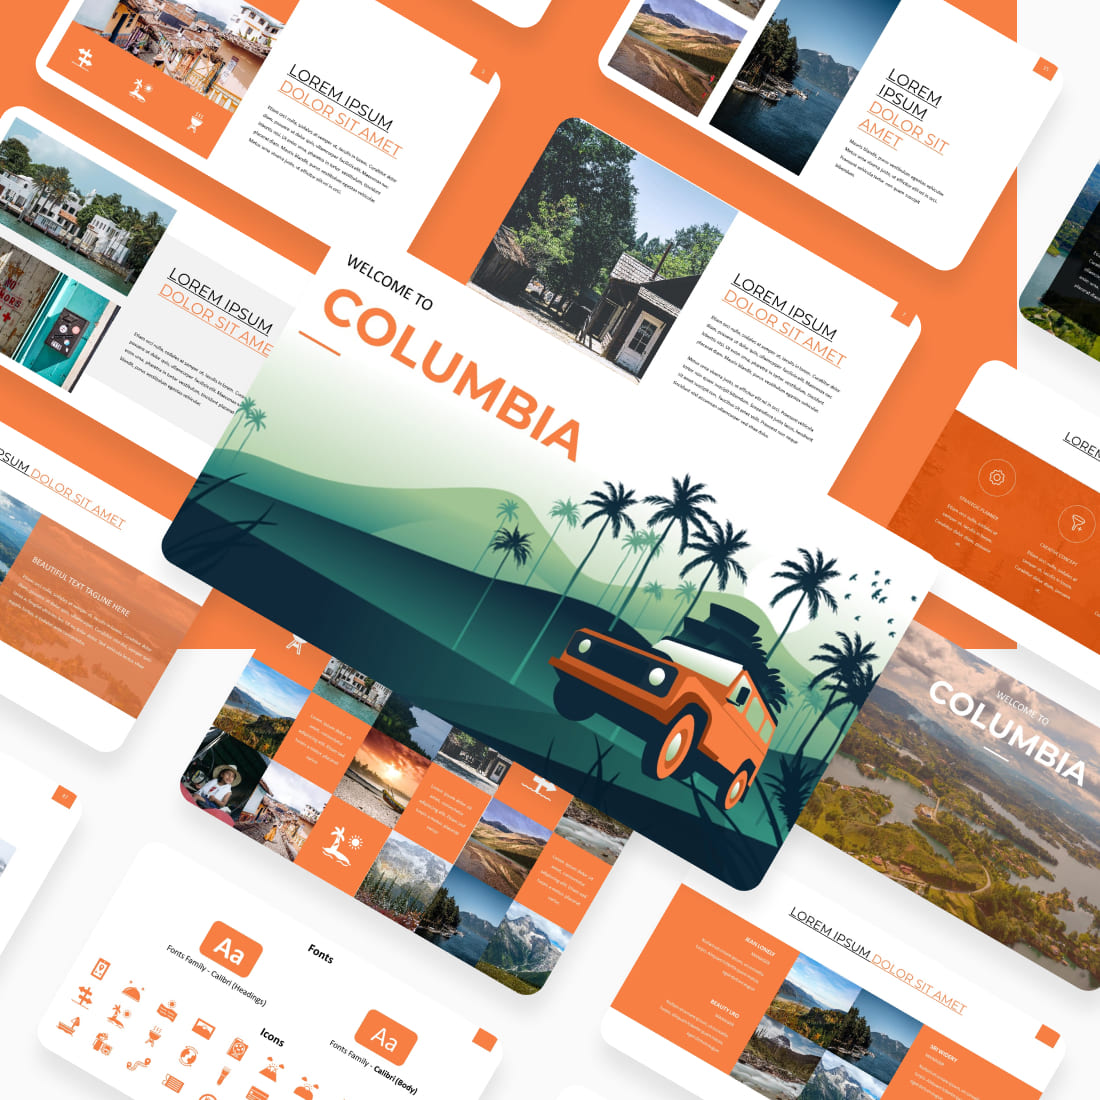 Сolombia Travel PowerPoint Template cover.